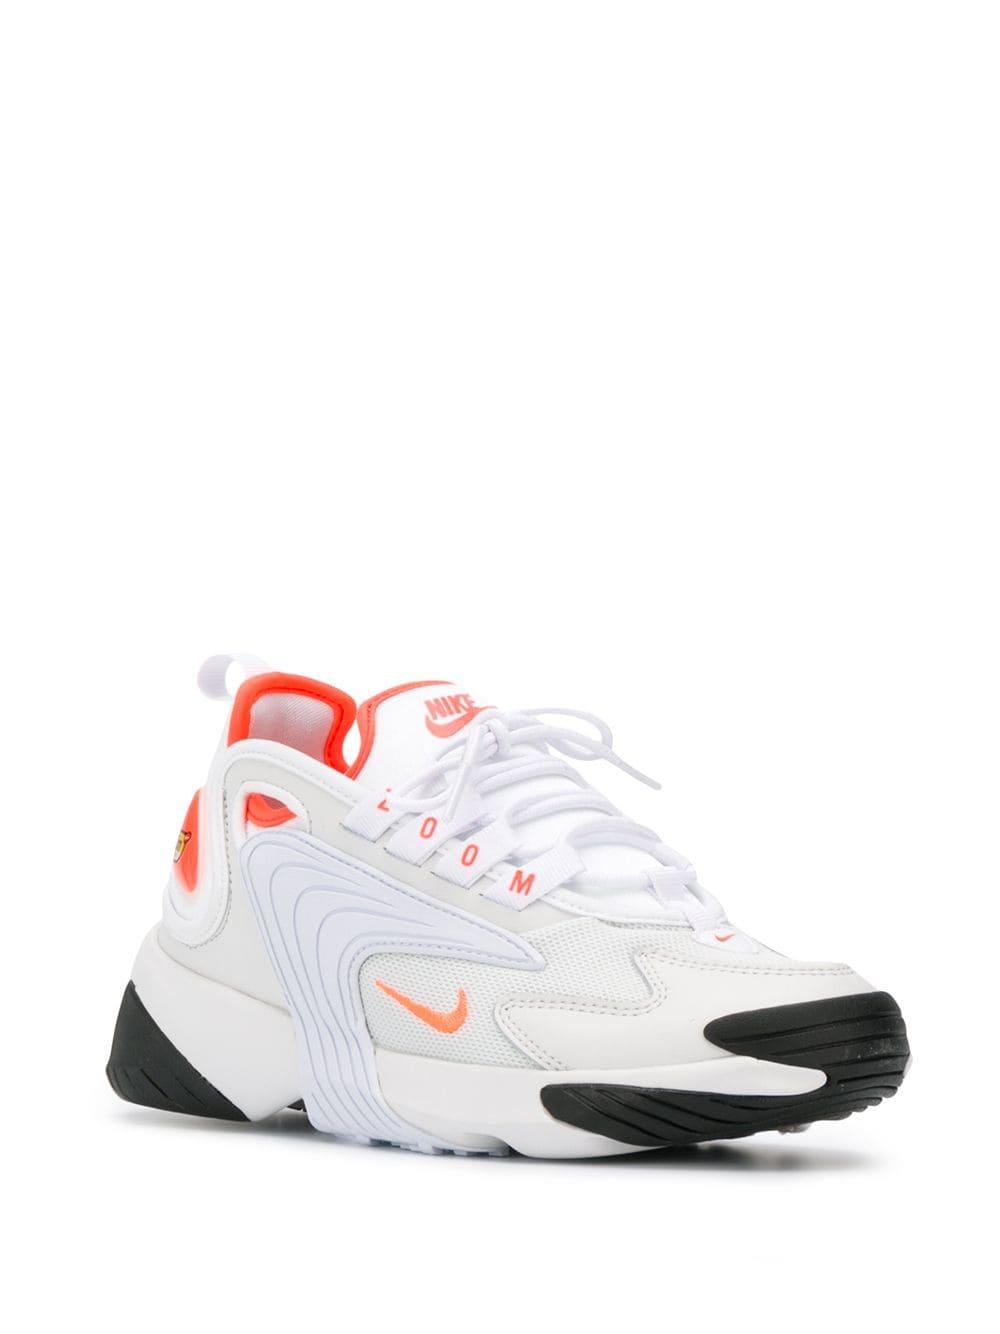 Nike Leather Off White And Orange Zoom 2k Sneakers Lyst